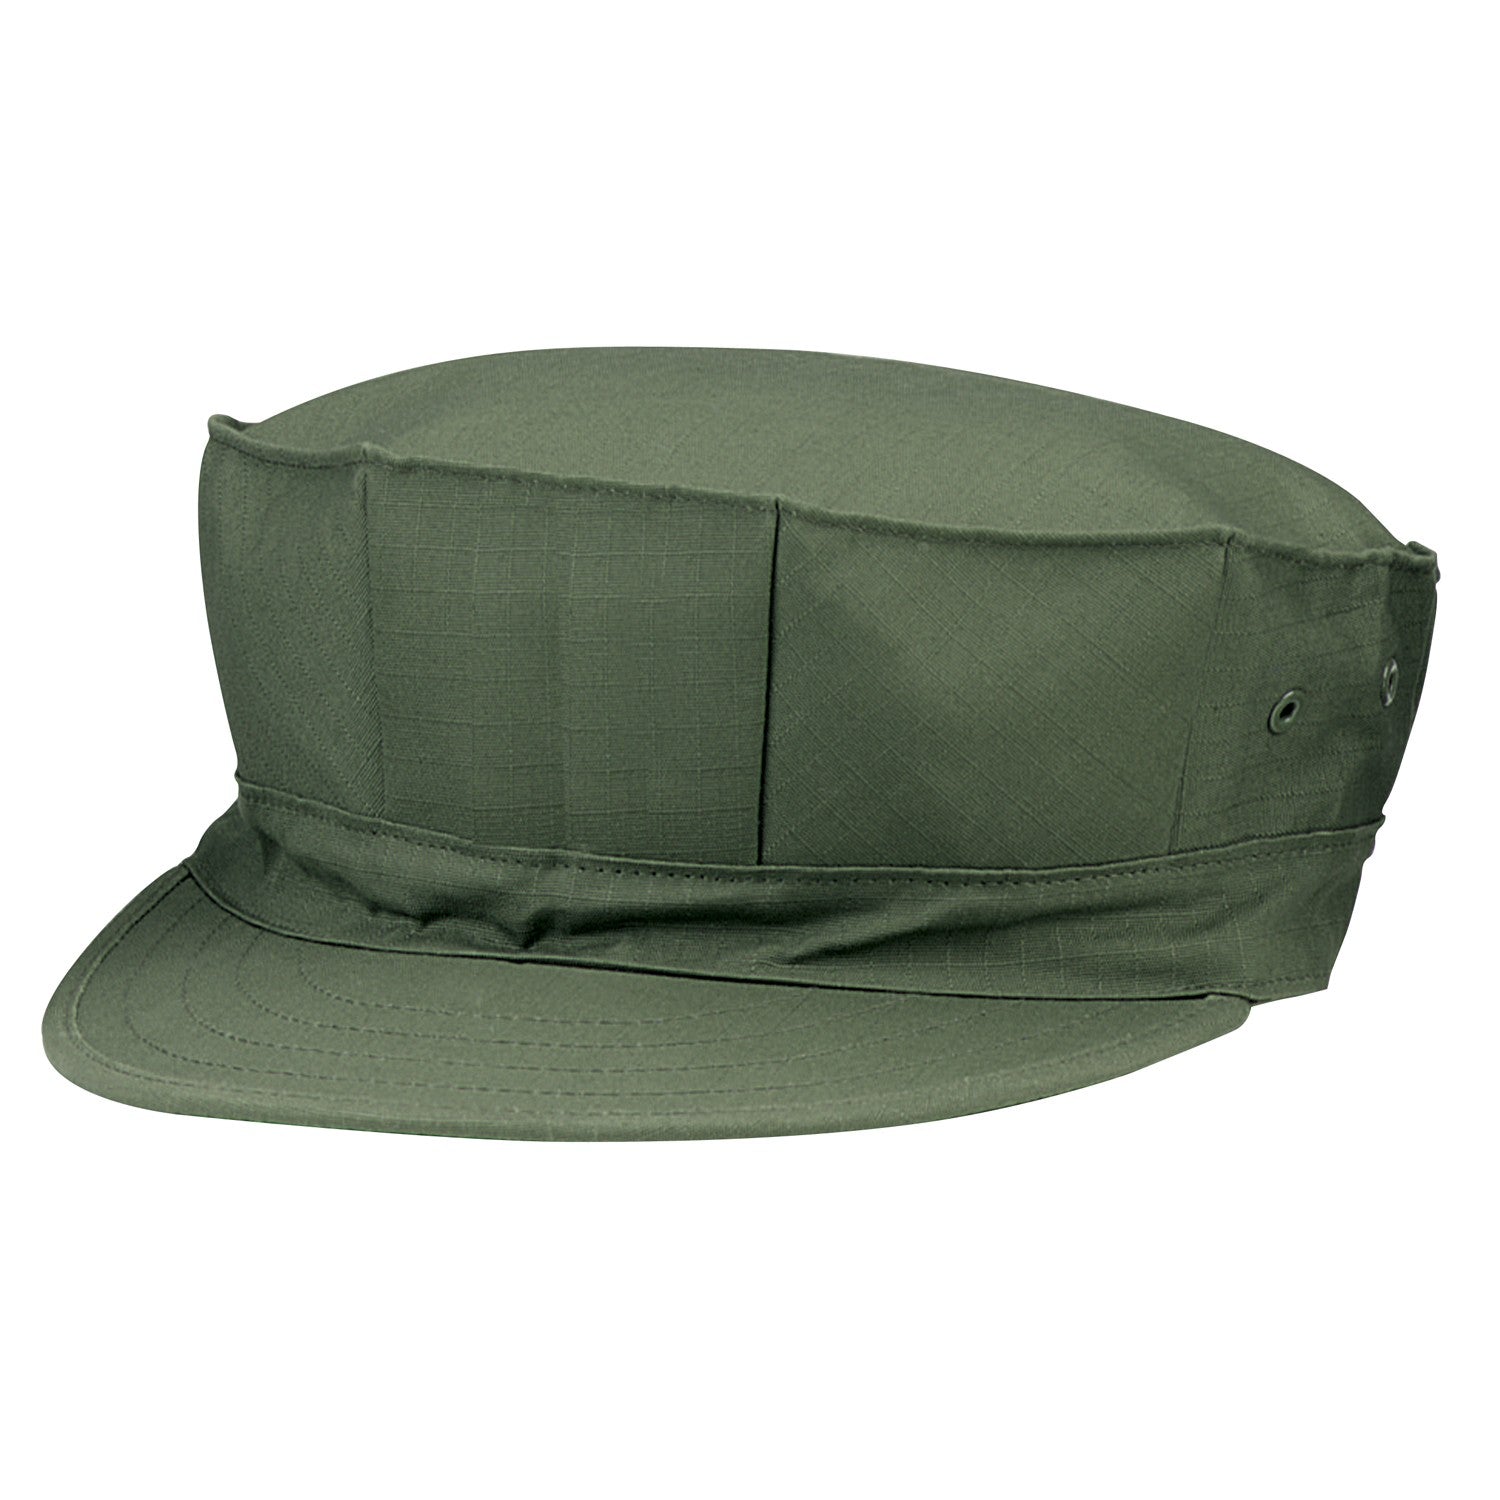 8 Point Military BDU Hat